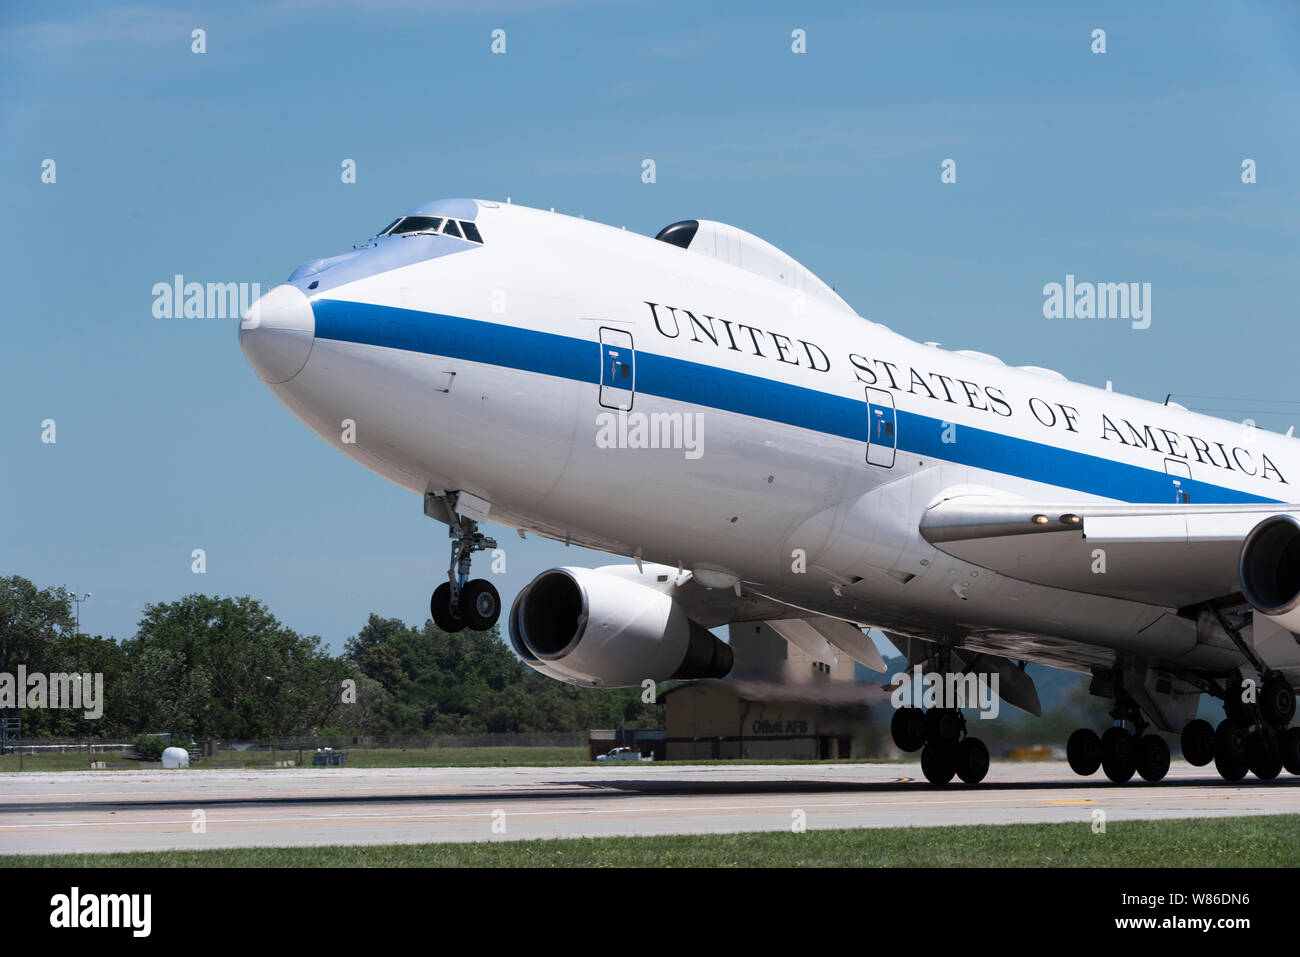 A U.S. Air Force E-4B National Airborne Operations Center aircraft takes off from Offutt Air Force Base, Nebraska, July 10, 2019. The main deck is divided into six functional areas: a command work area, a conference room, a briefing room, an operations team work area, a communications area and a rest area. (U.S. Air Force photo by Staff Sgt. Jacob Skovo) Stock Photo